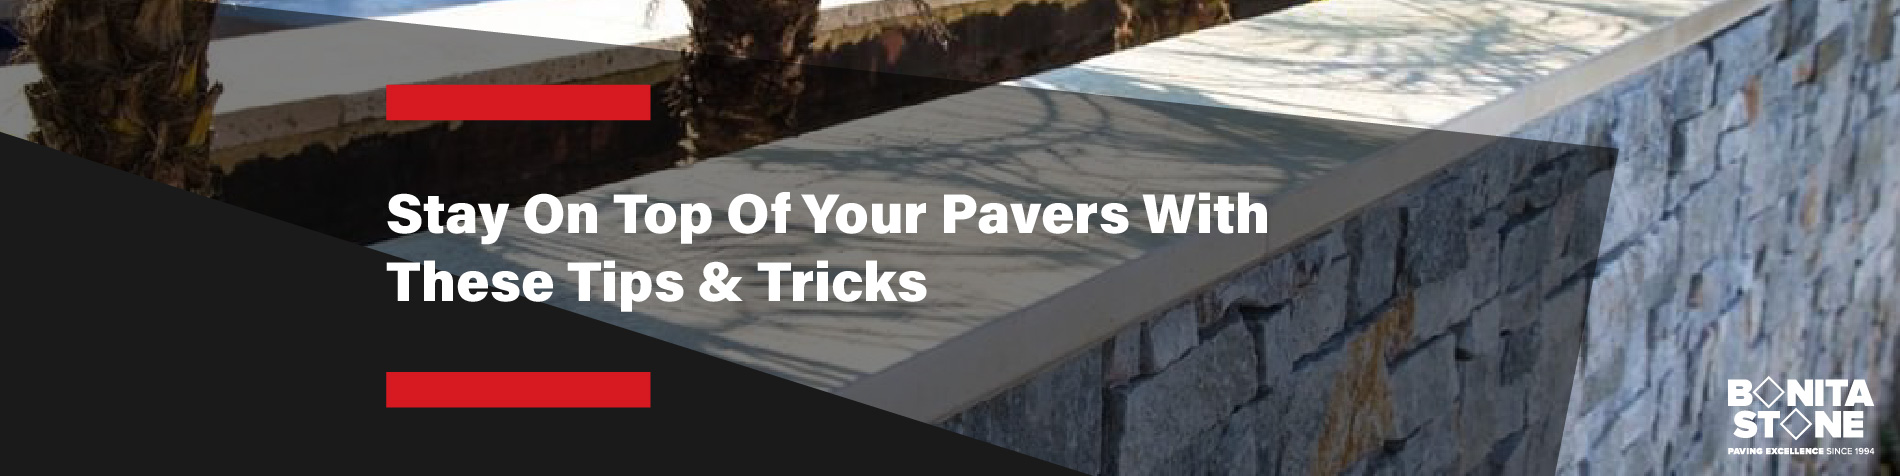 stay-on-top-of-yours-pavers-blog-post-featuredimage